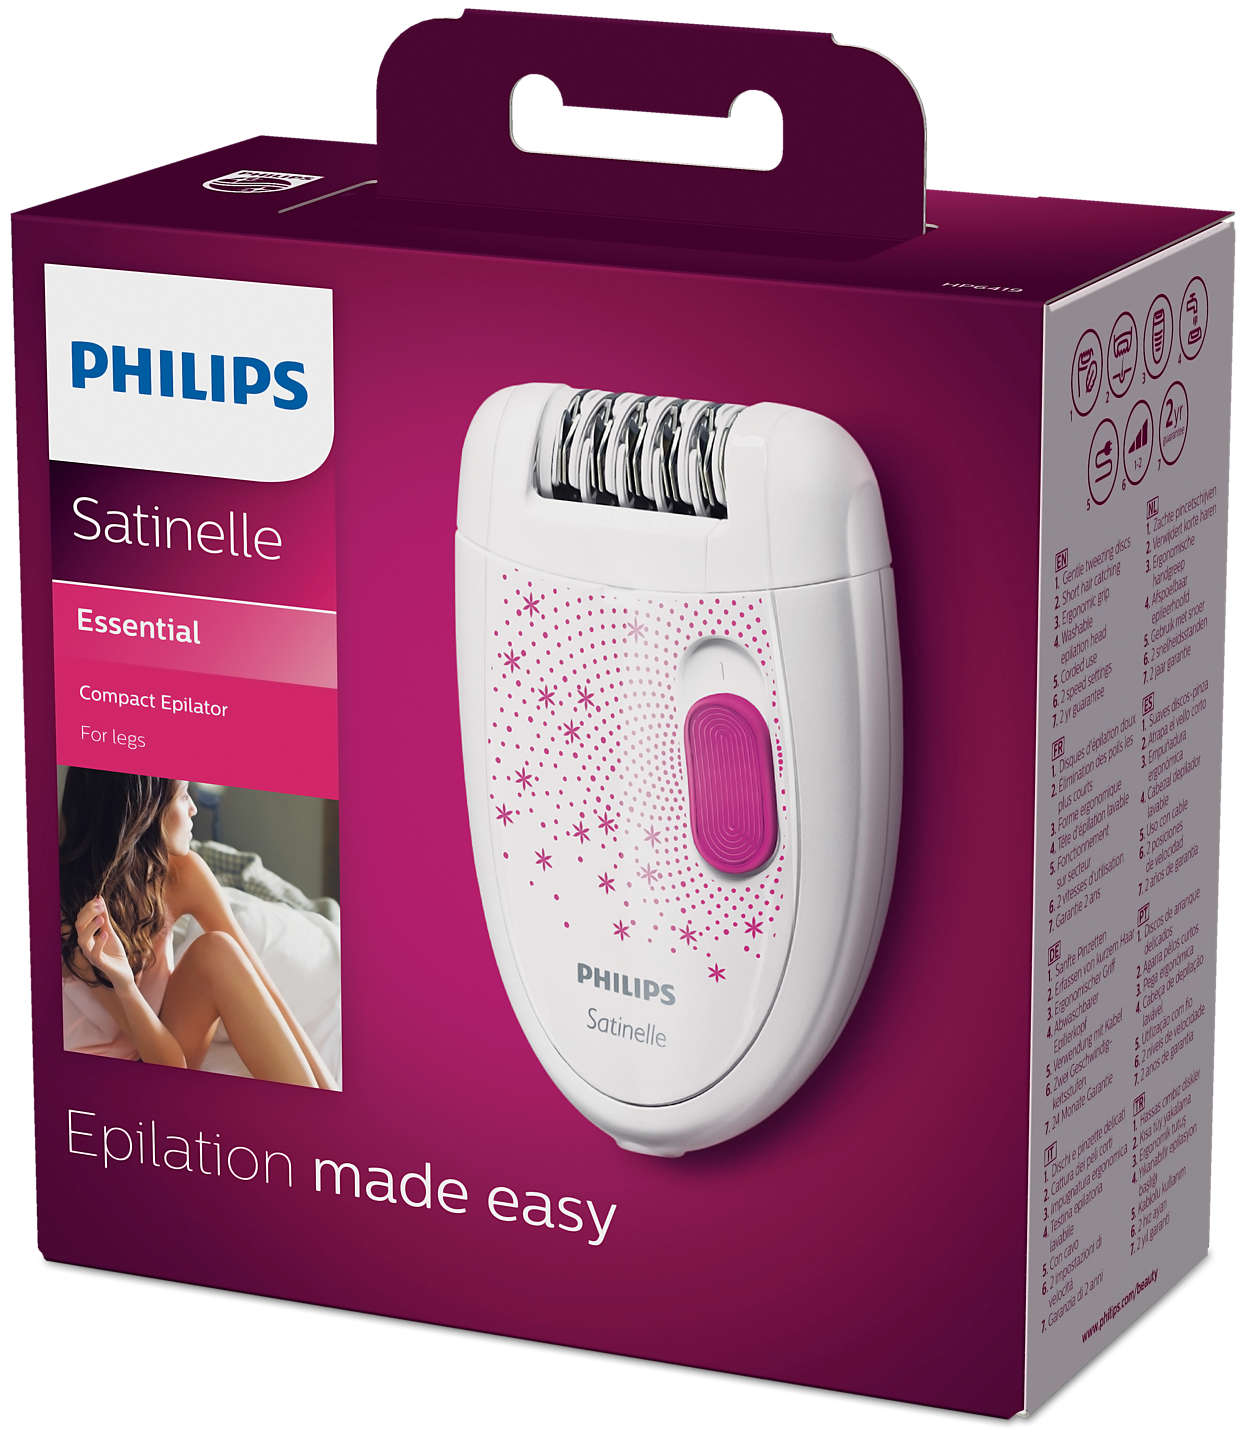 Image result for Philips Satinelle Essential Epilator (HP6419/01)